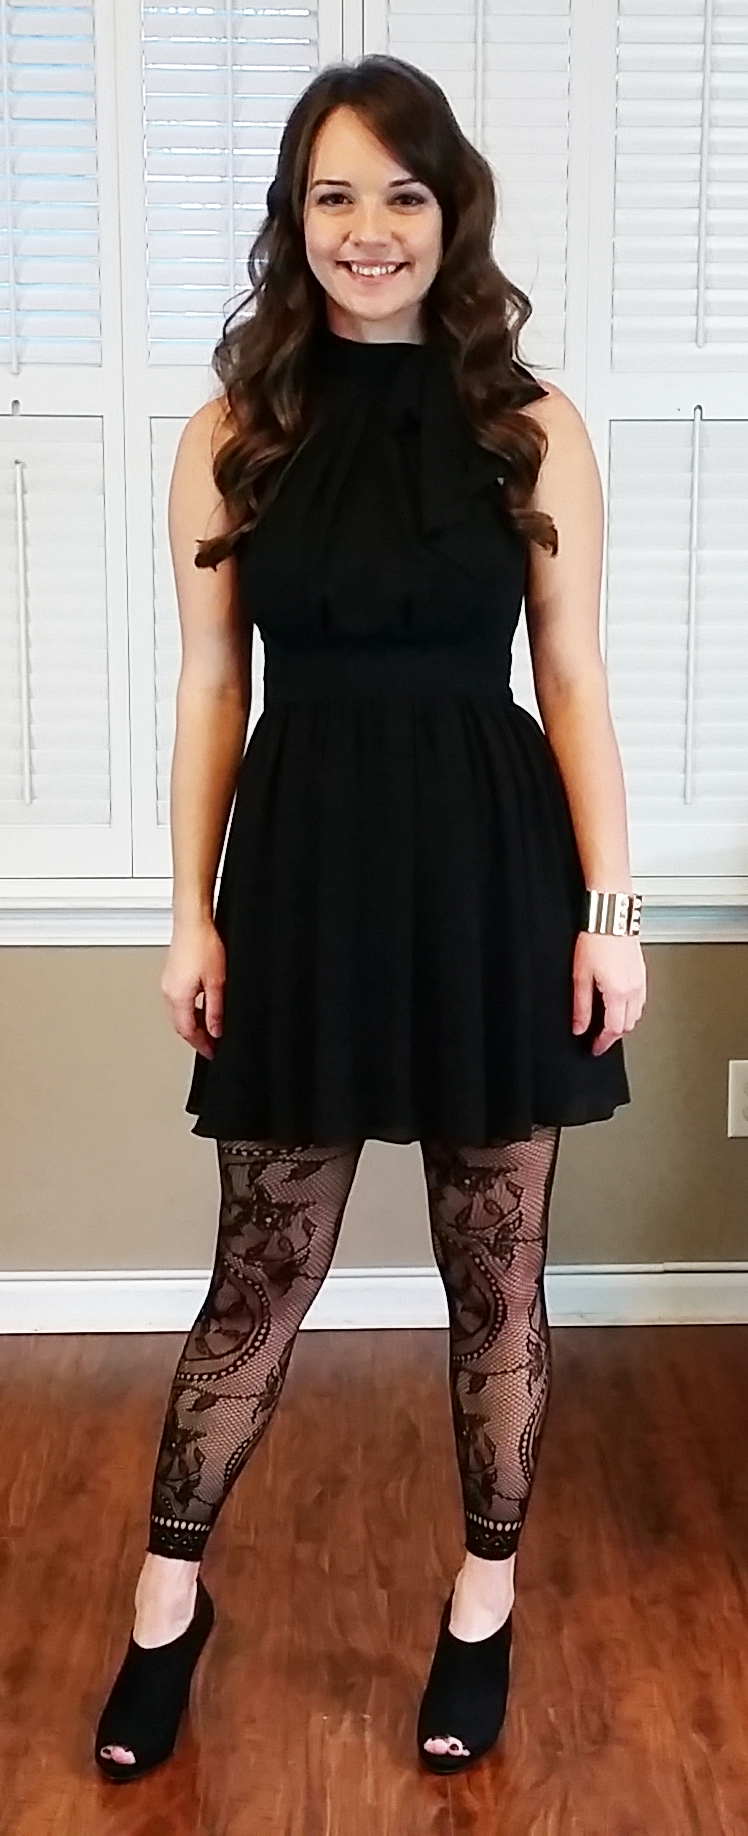 Little black dress with lace tights and 